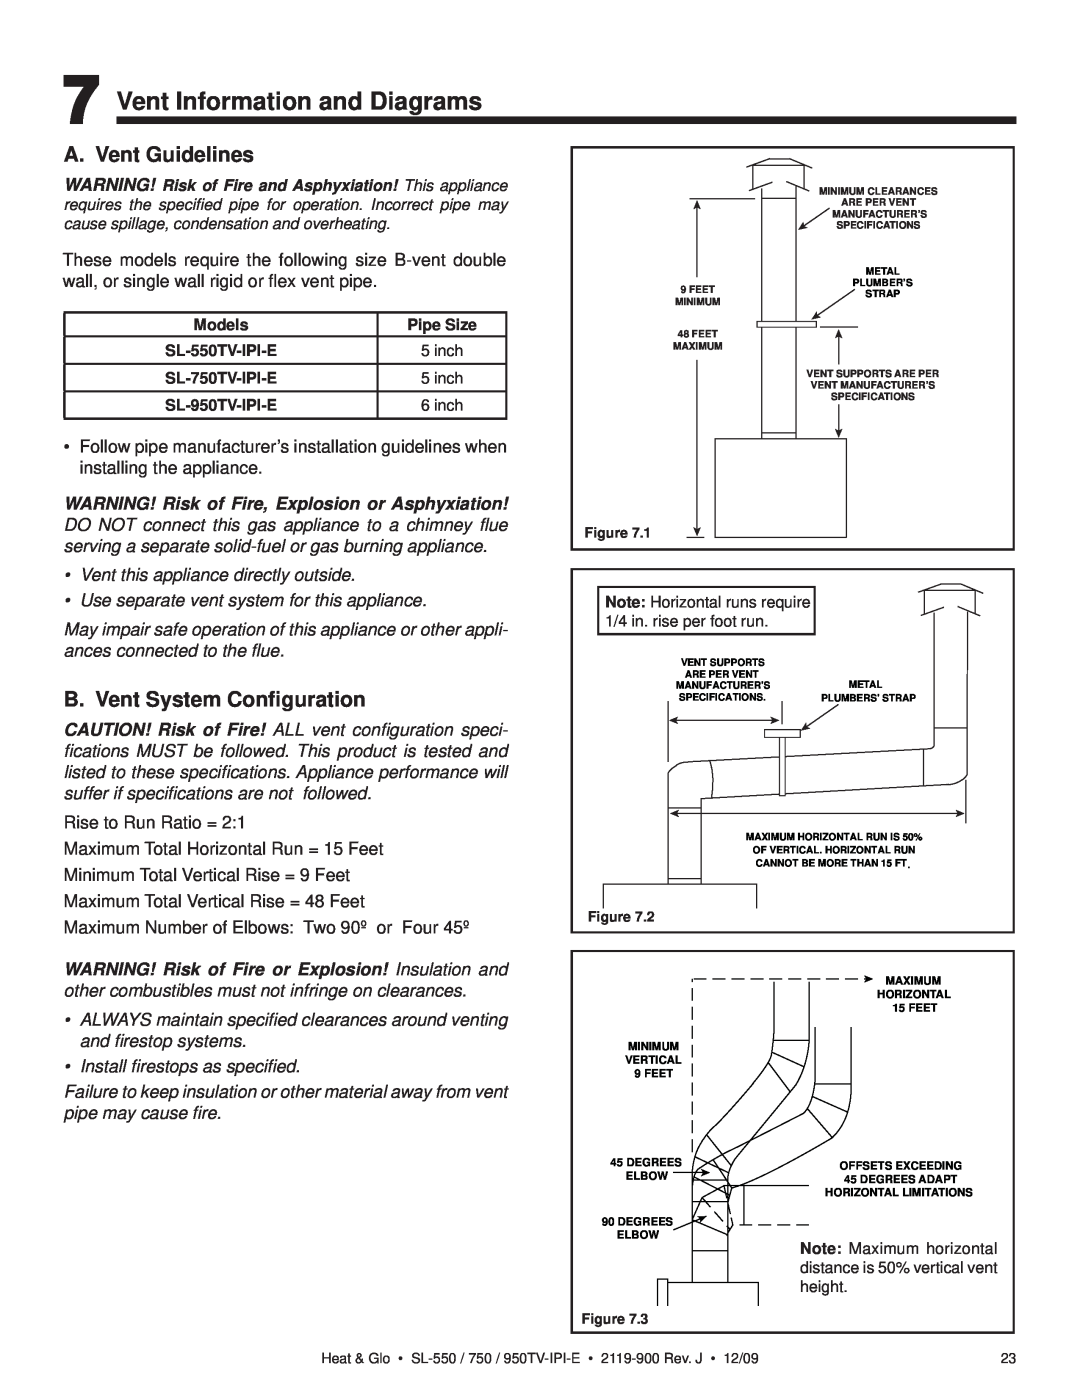 Heat & Glo LifeStyle SL-550TV-IPI-E Vent Information and Diagrams, A. Vent Guidelines, B. Vent System Conﬁguration 